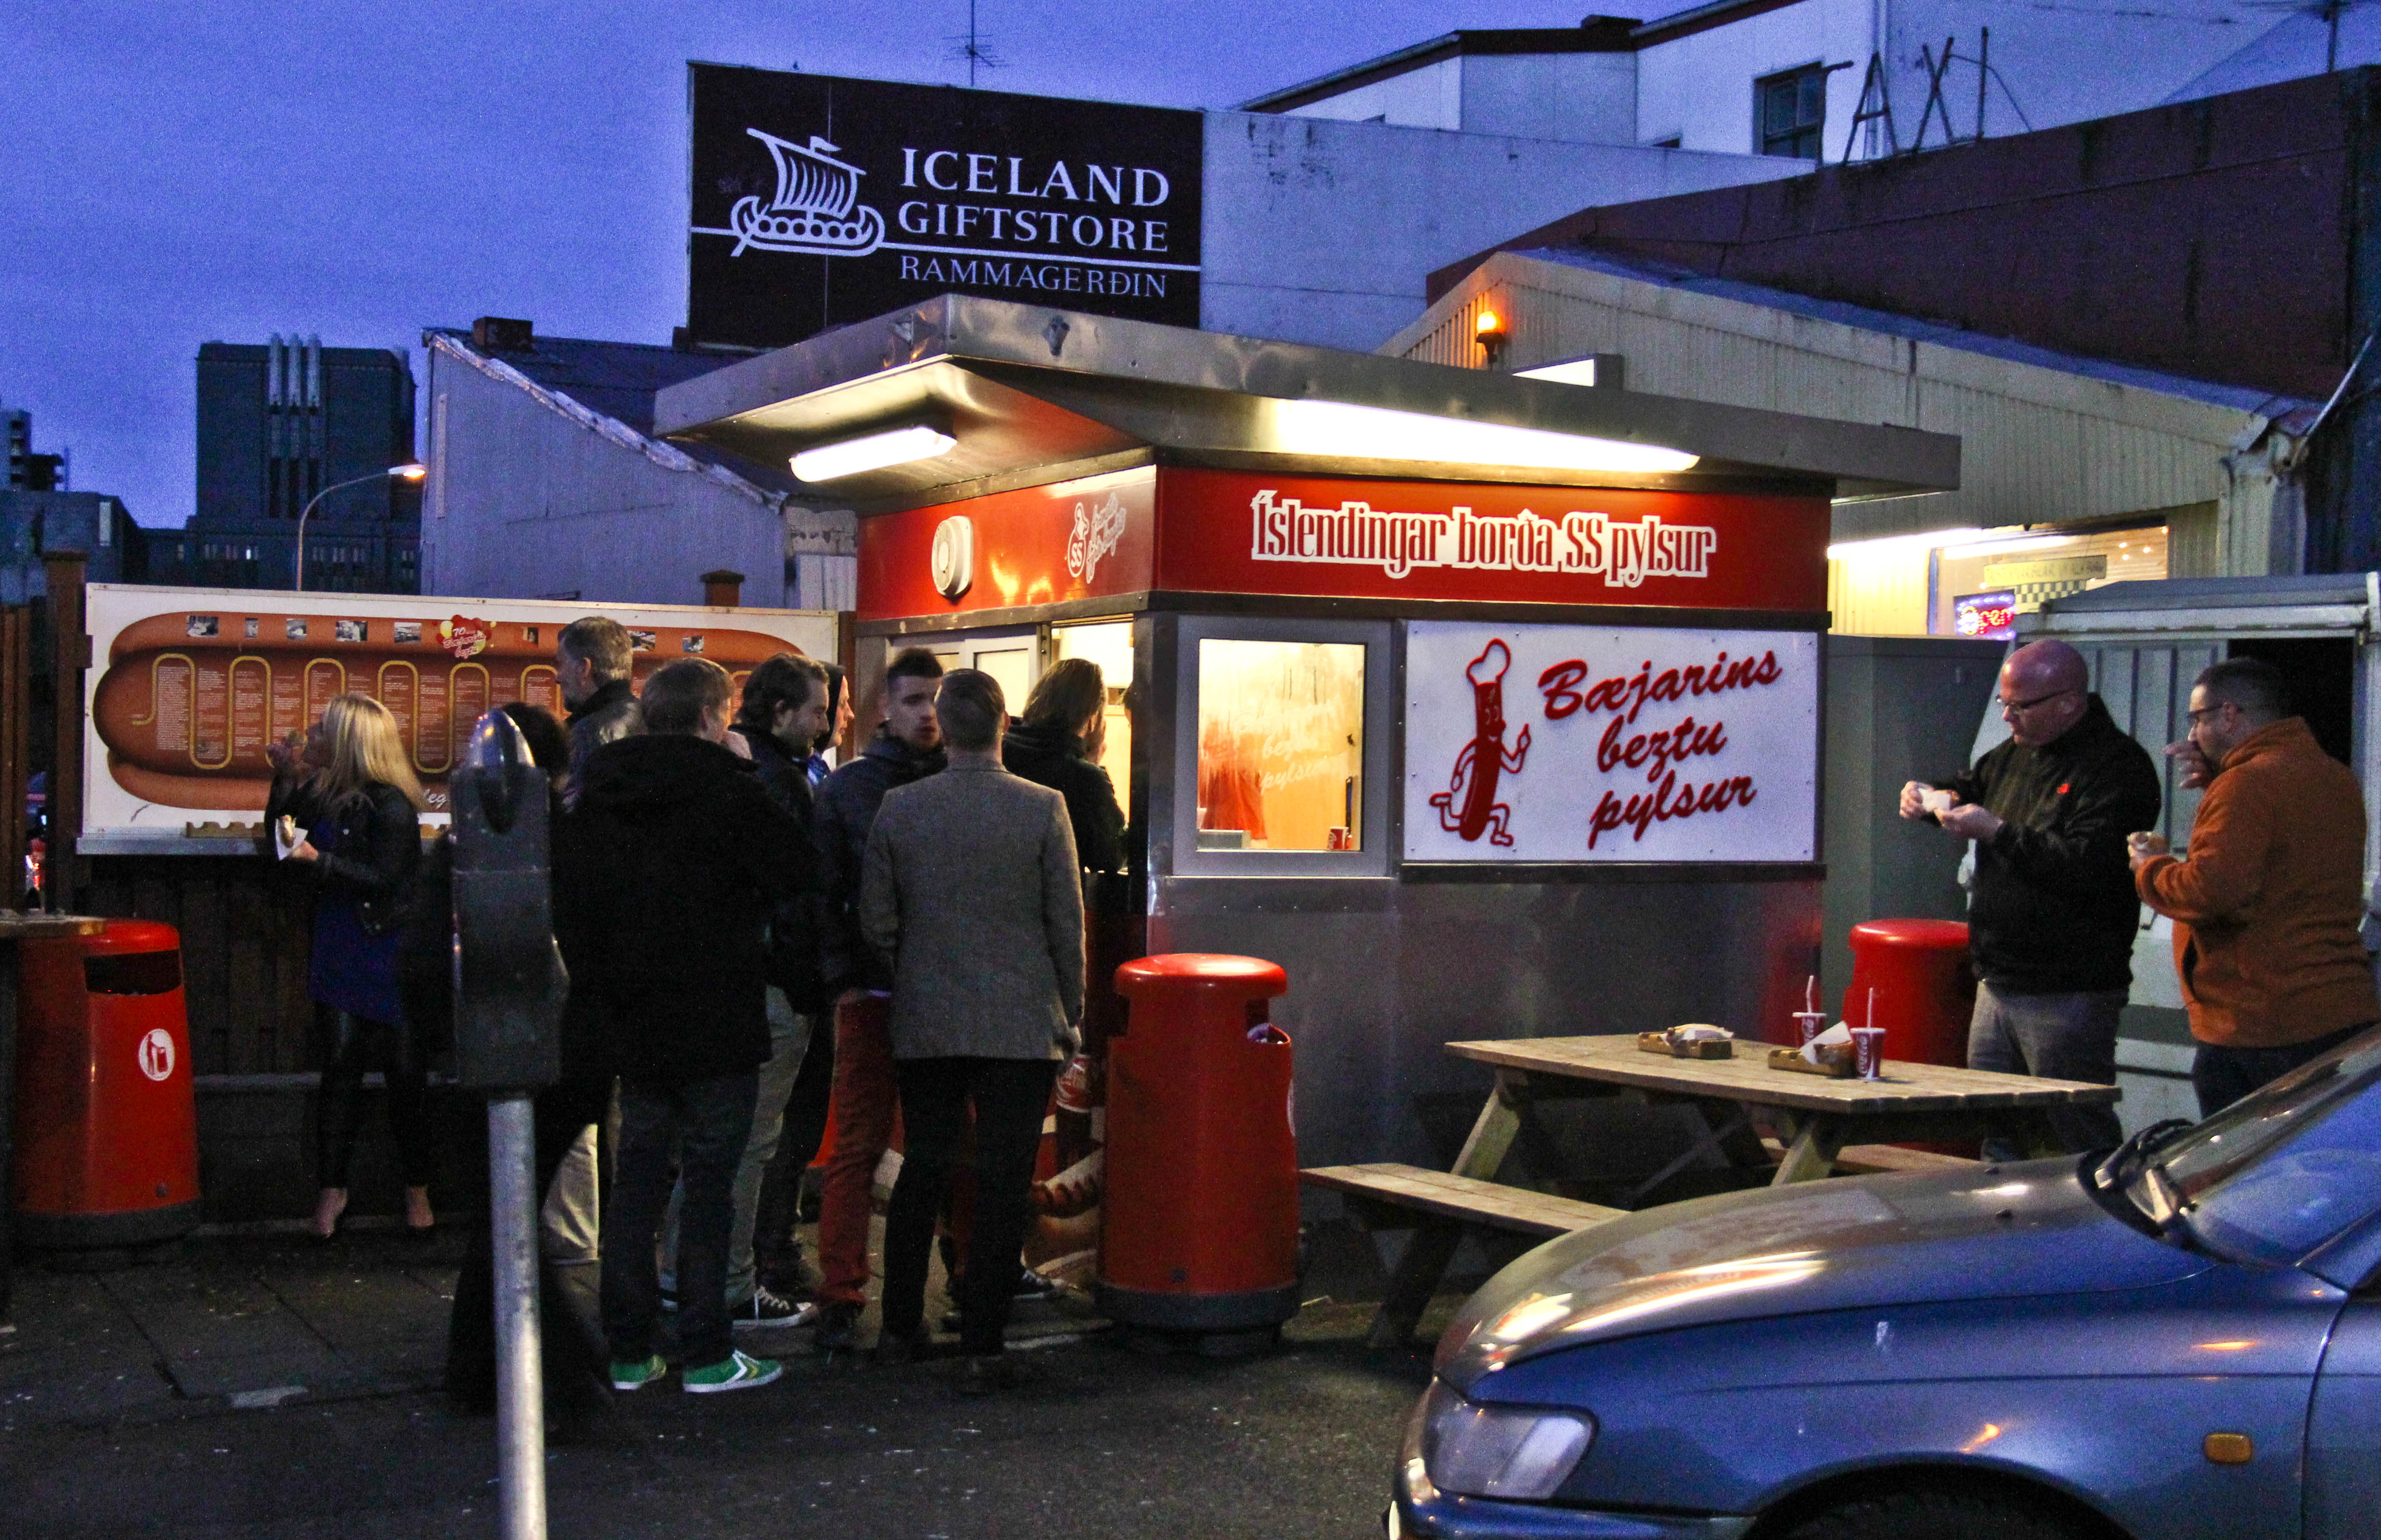 Check out Reykjavik's most famous hot dog stand!